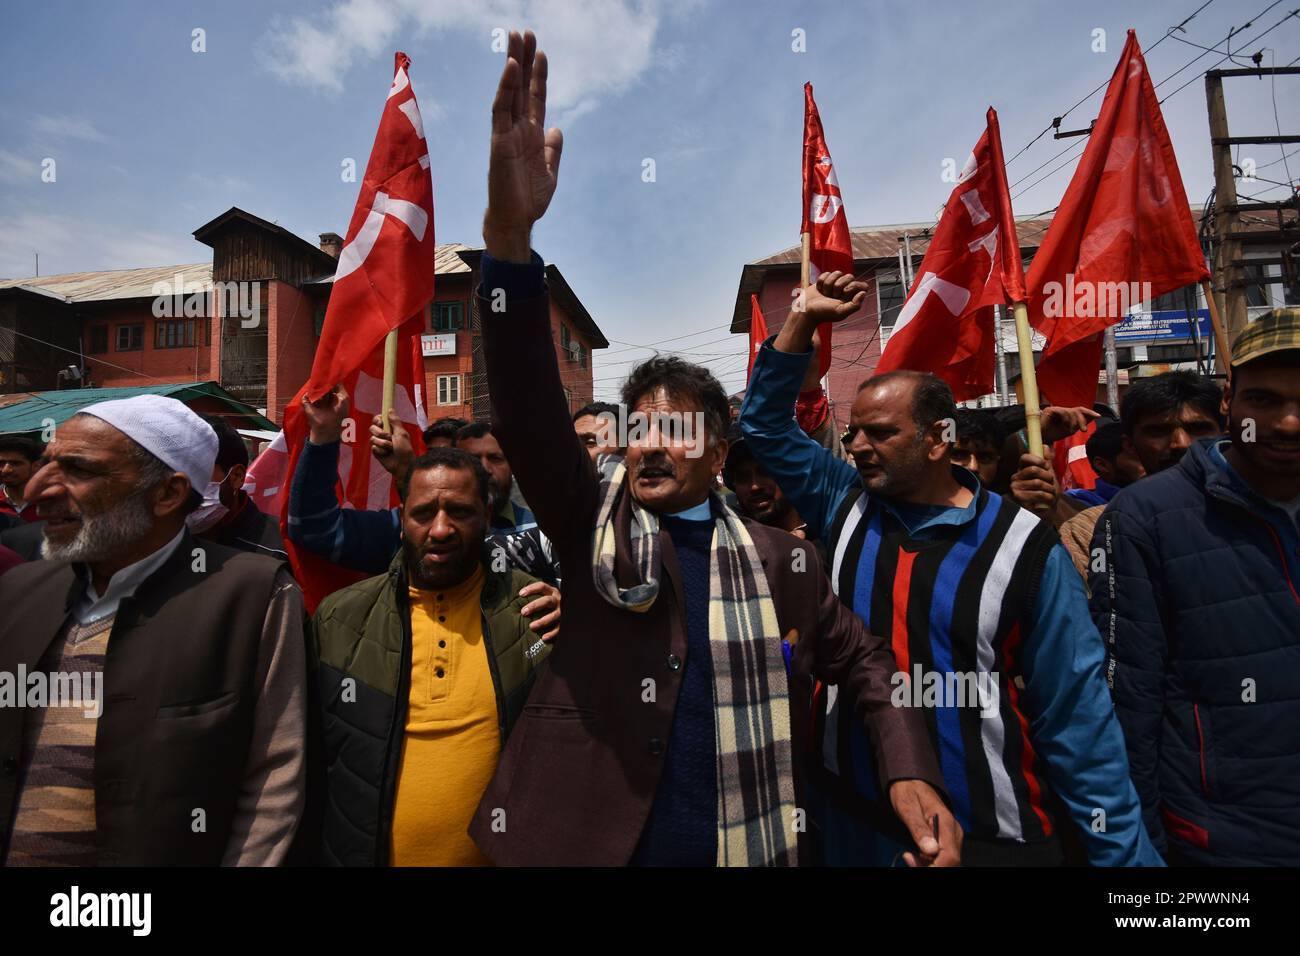 May 1, 2023, Srinagar, Jammu and Kashmir, India: Kashmiri government contractual workers and daily wagers from various labour groups shout slogans as they stage a protest marking the International Labor Day on May 01, 2023 in Srinagar, Indian administered Kashmir, India. Hundreds of Kashmiri government contractual workers and daily wagers from various labour groups took part in a rally on International Labor Day and staged a demonstration to draw attention to their hardships caused by the delay in fulfilling their demands. The demonstrators demanded an increase in their salary. The protest mar Stock Photo